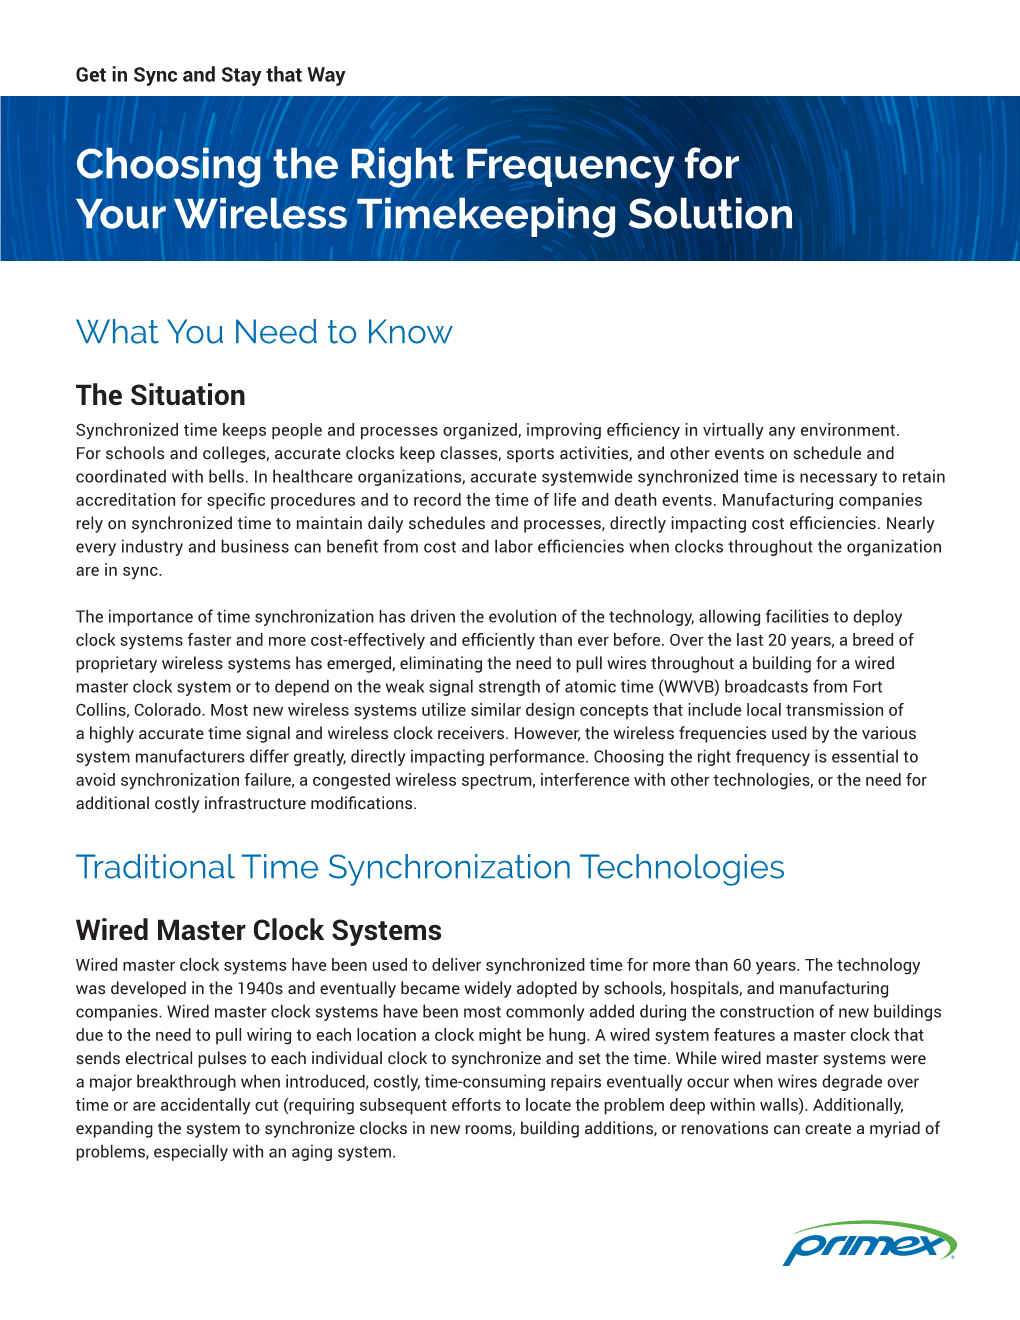 Choosing the Right Frequency for Your Wireless Timekeeping Solution